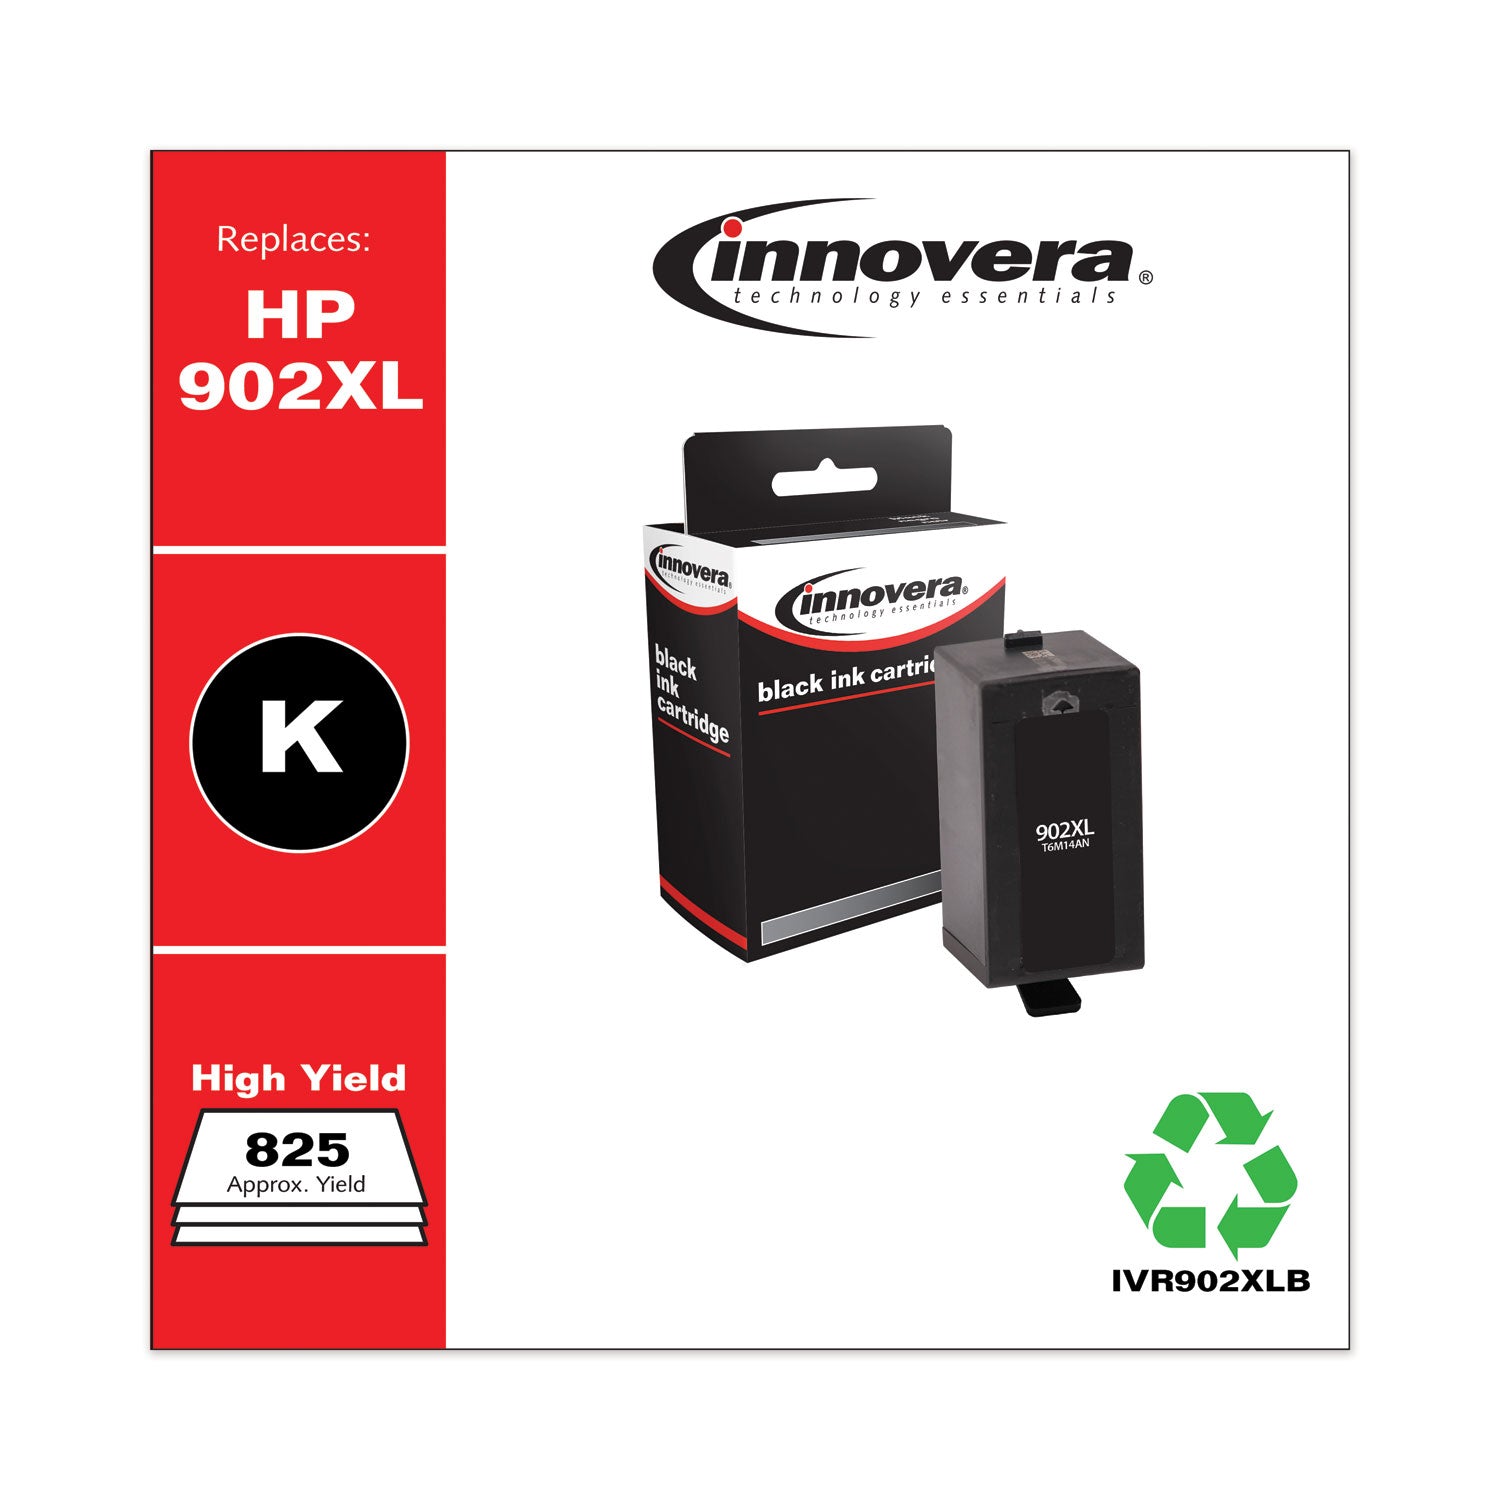 remanufactured-black-high-yield-ink-replacement-for-902xl-t6m14an-825-page-yield_ivr902xlb - 2